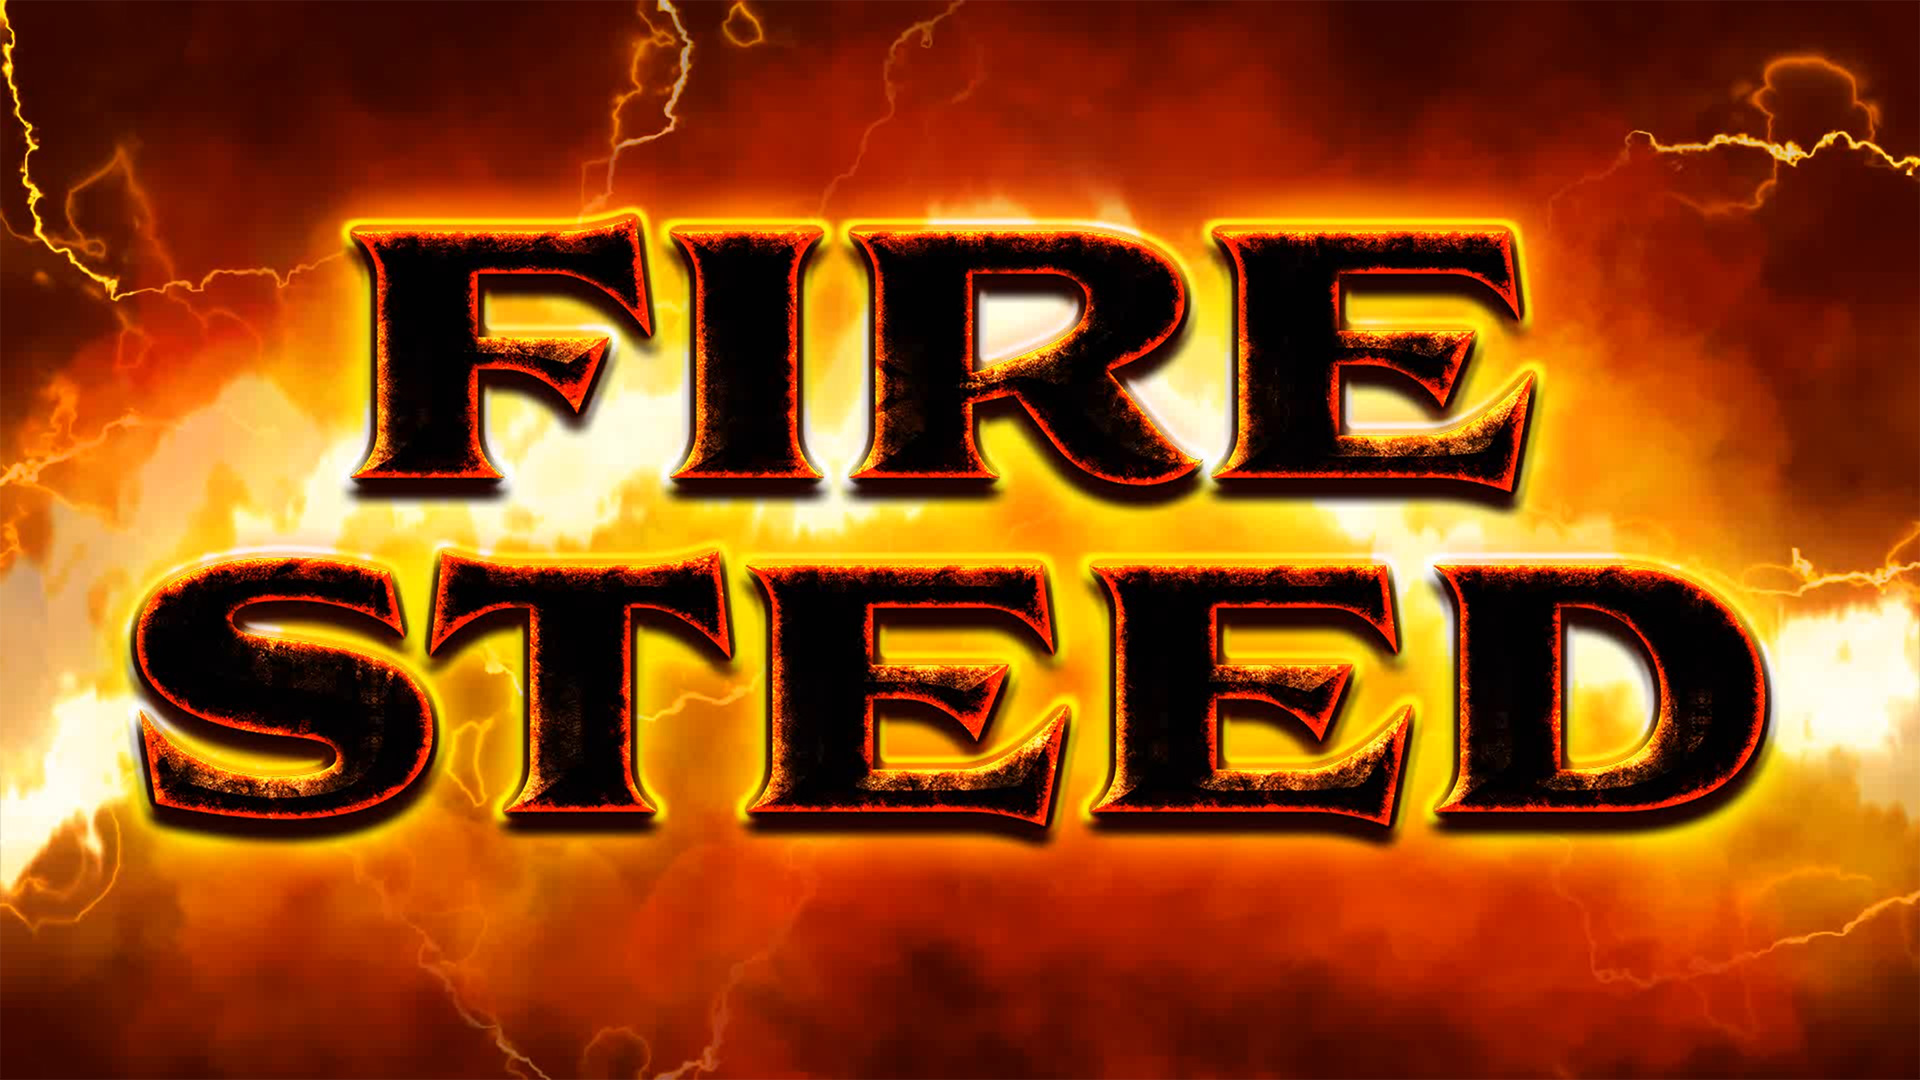 Picture for Fire Steed 